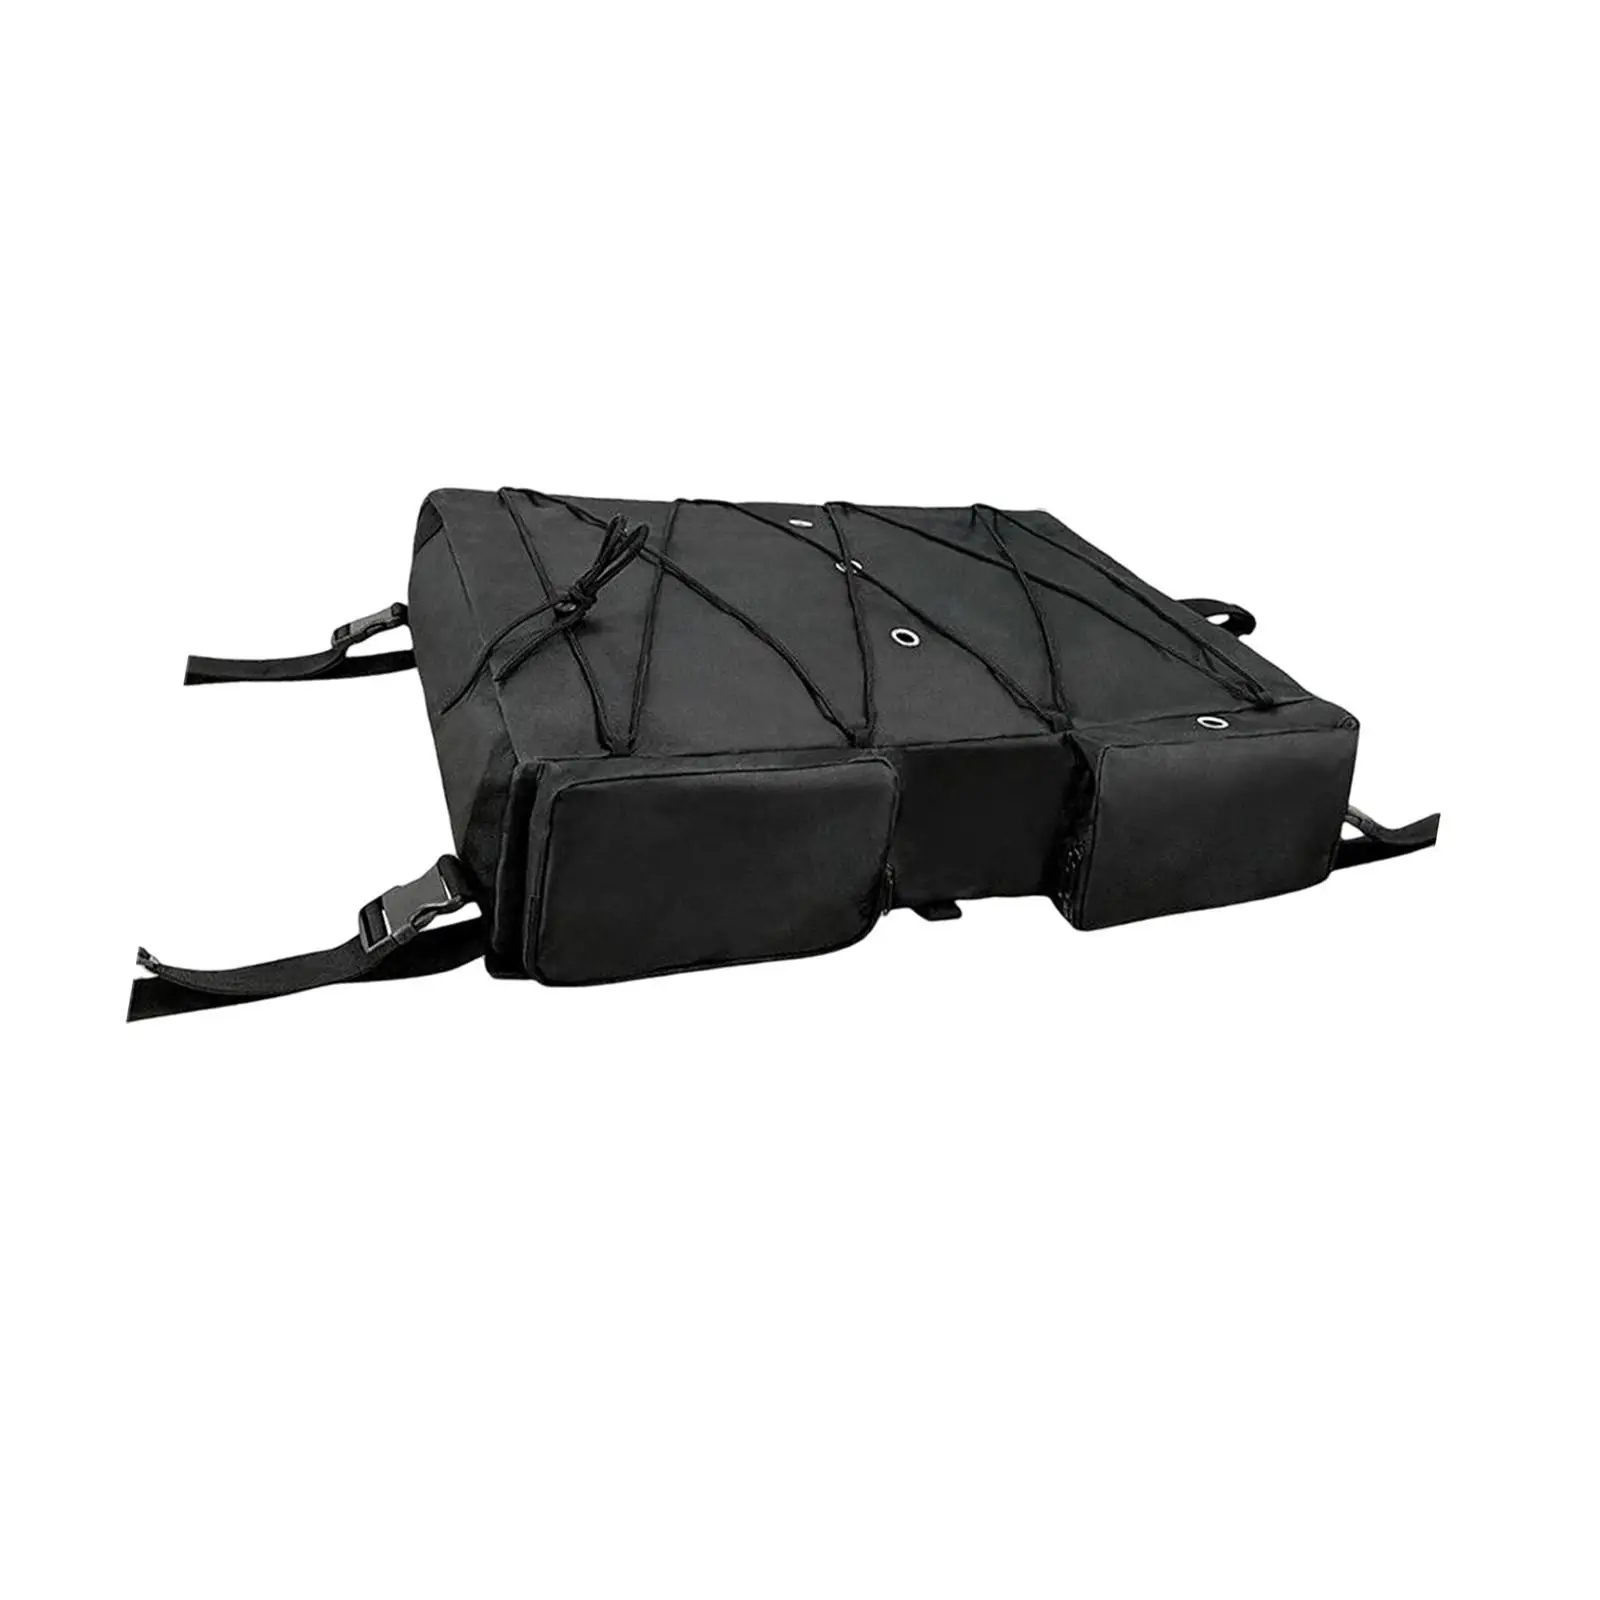 T Bag T Top Bimini Storage Pack Reusable Durable 600D Oxford Cloth Overhead T Bags Vests Storage Bag for Camping Outdoor